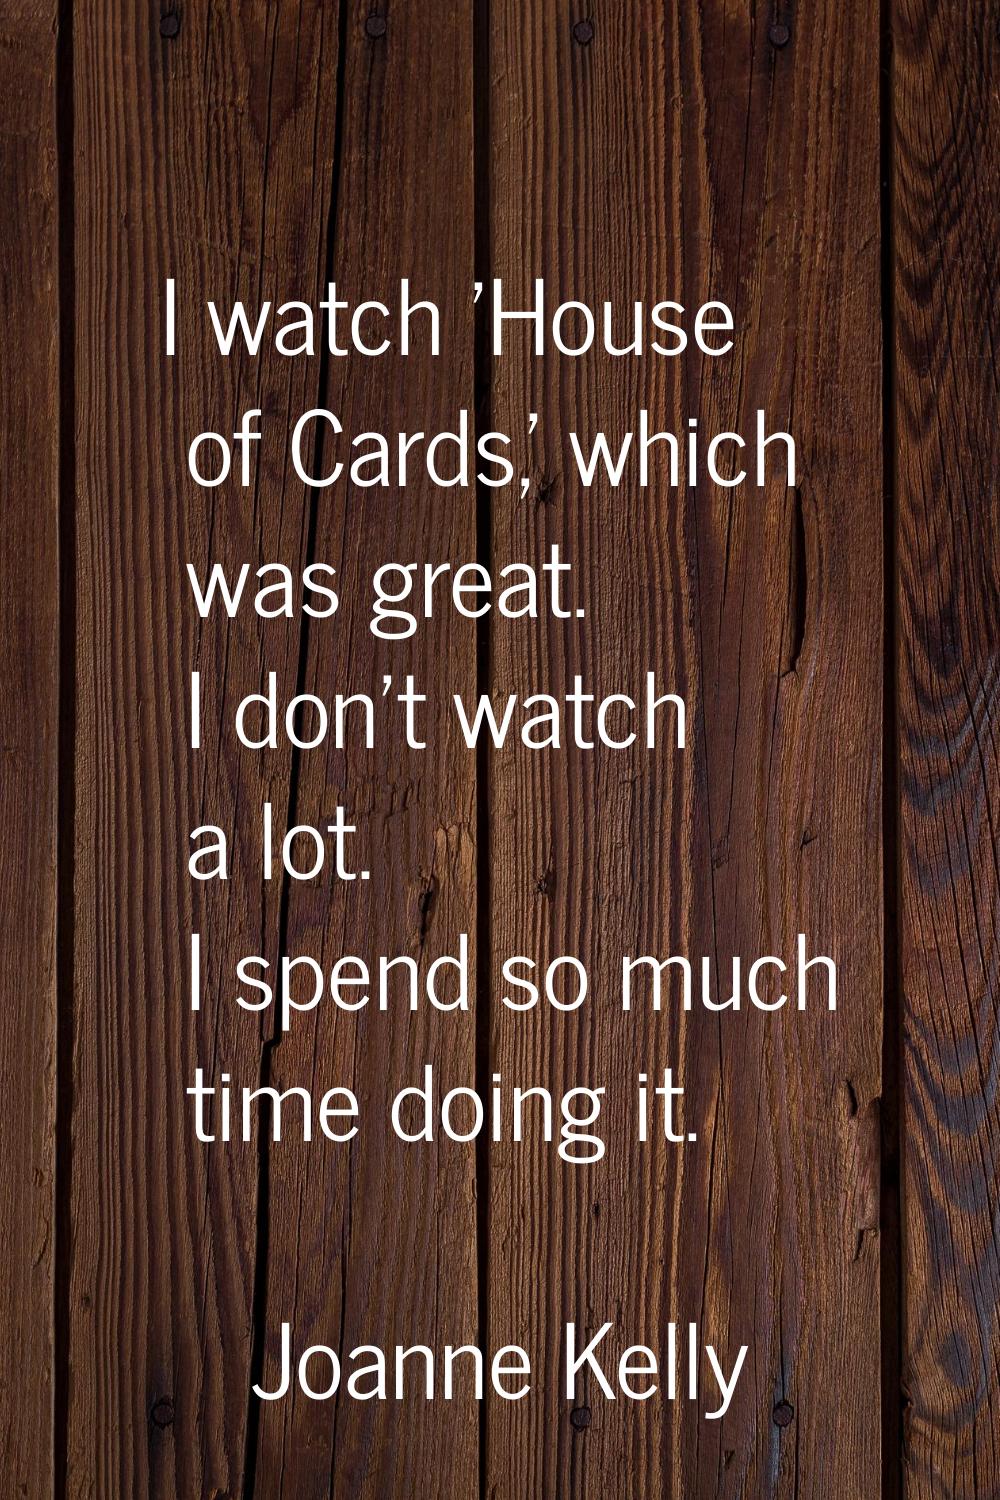 I watch 'House of Cards,' which was great. I don't watch a lot. I spend so much time doing it.